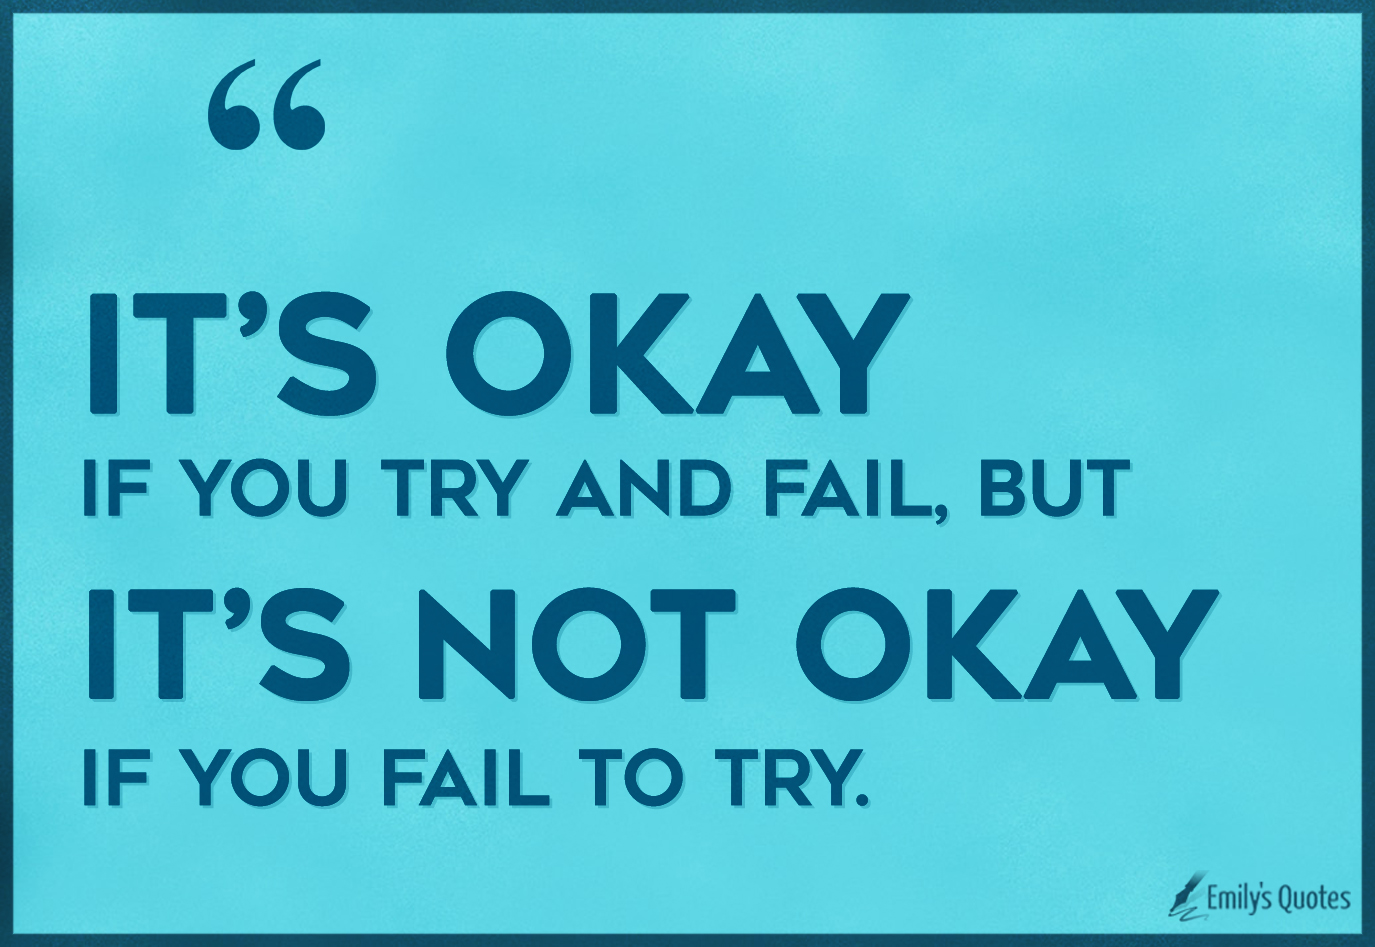 It’s okay if you try and fail, but it’s not okay if you fail to try